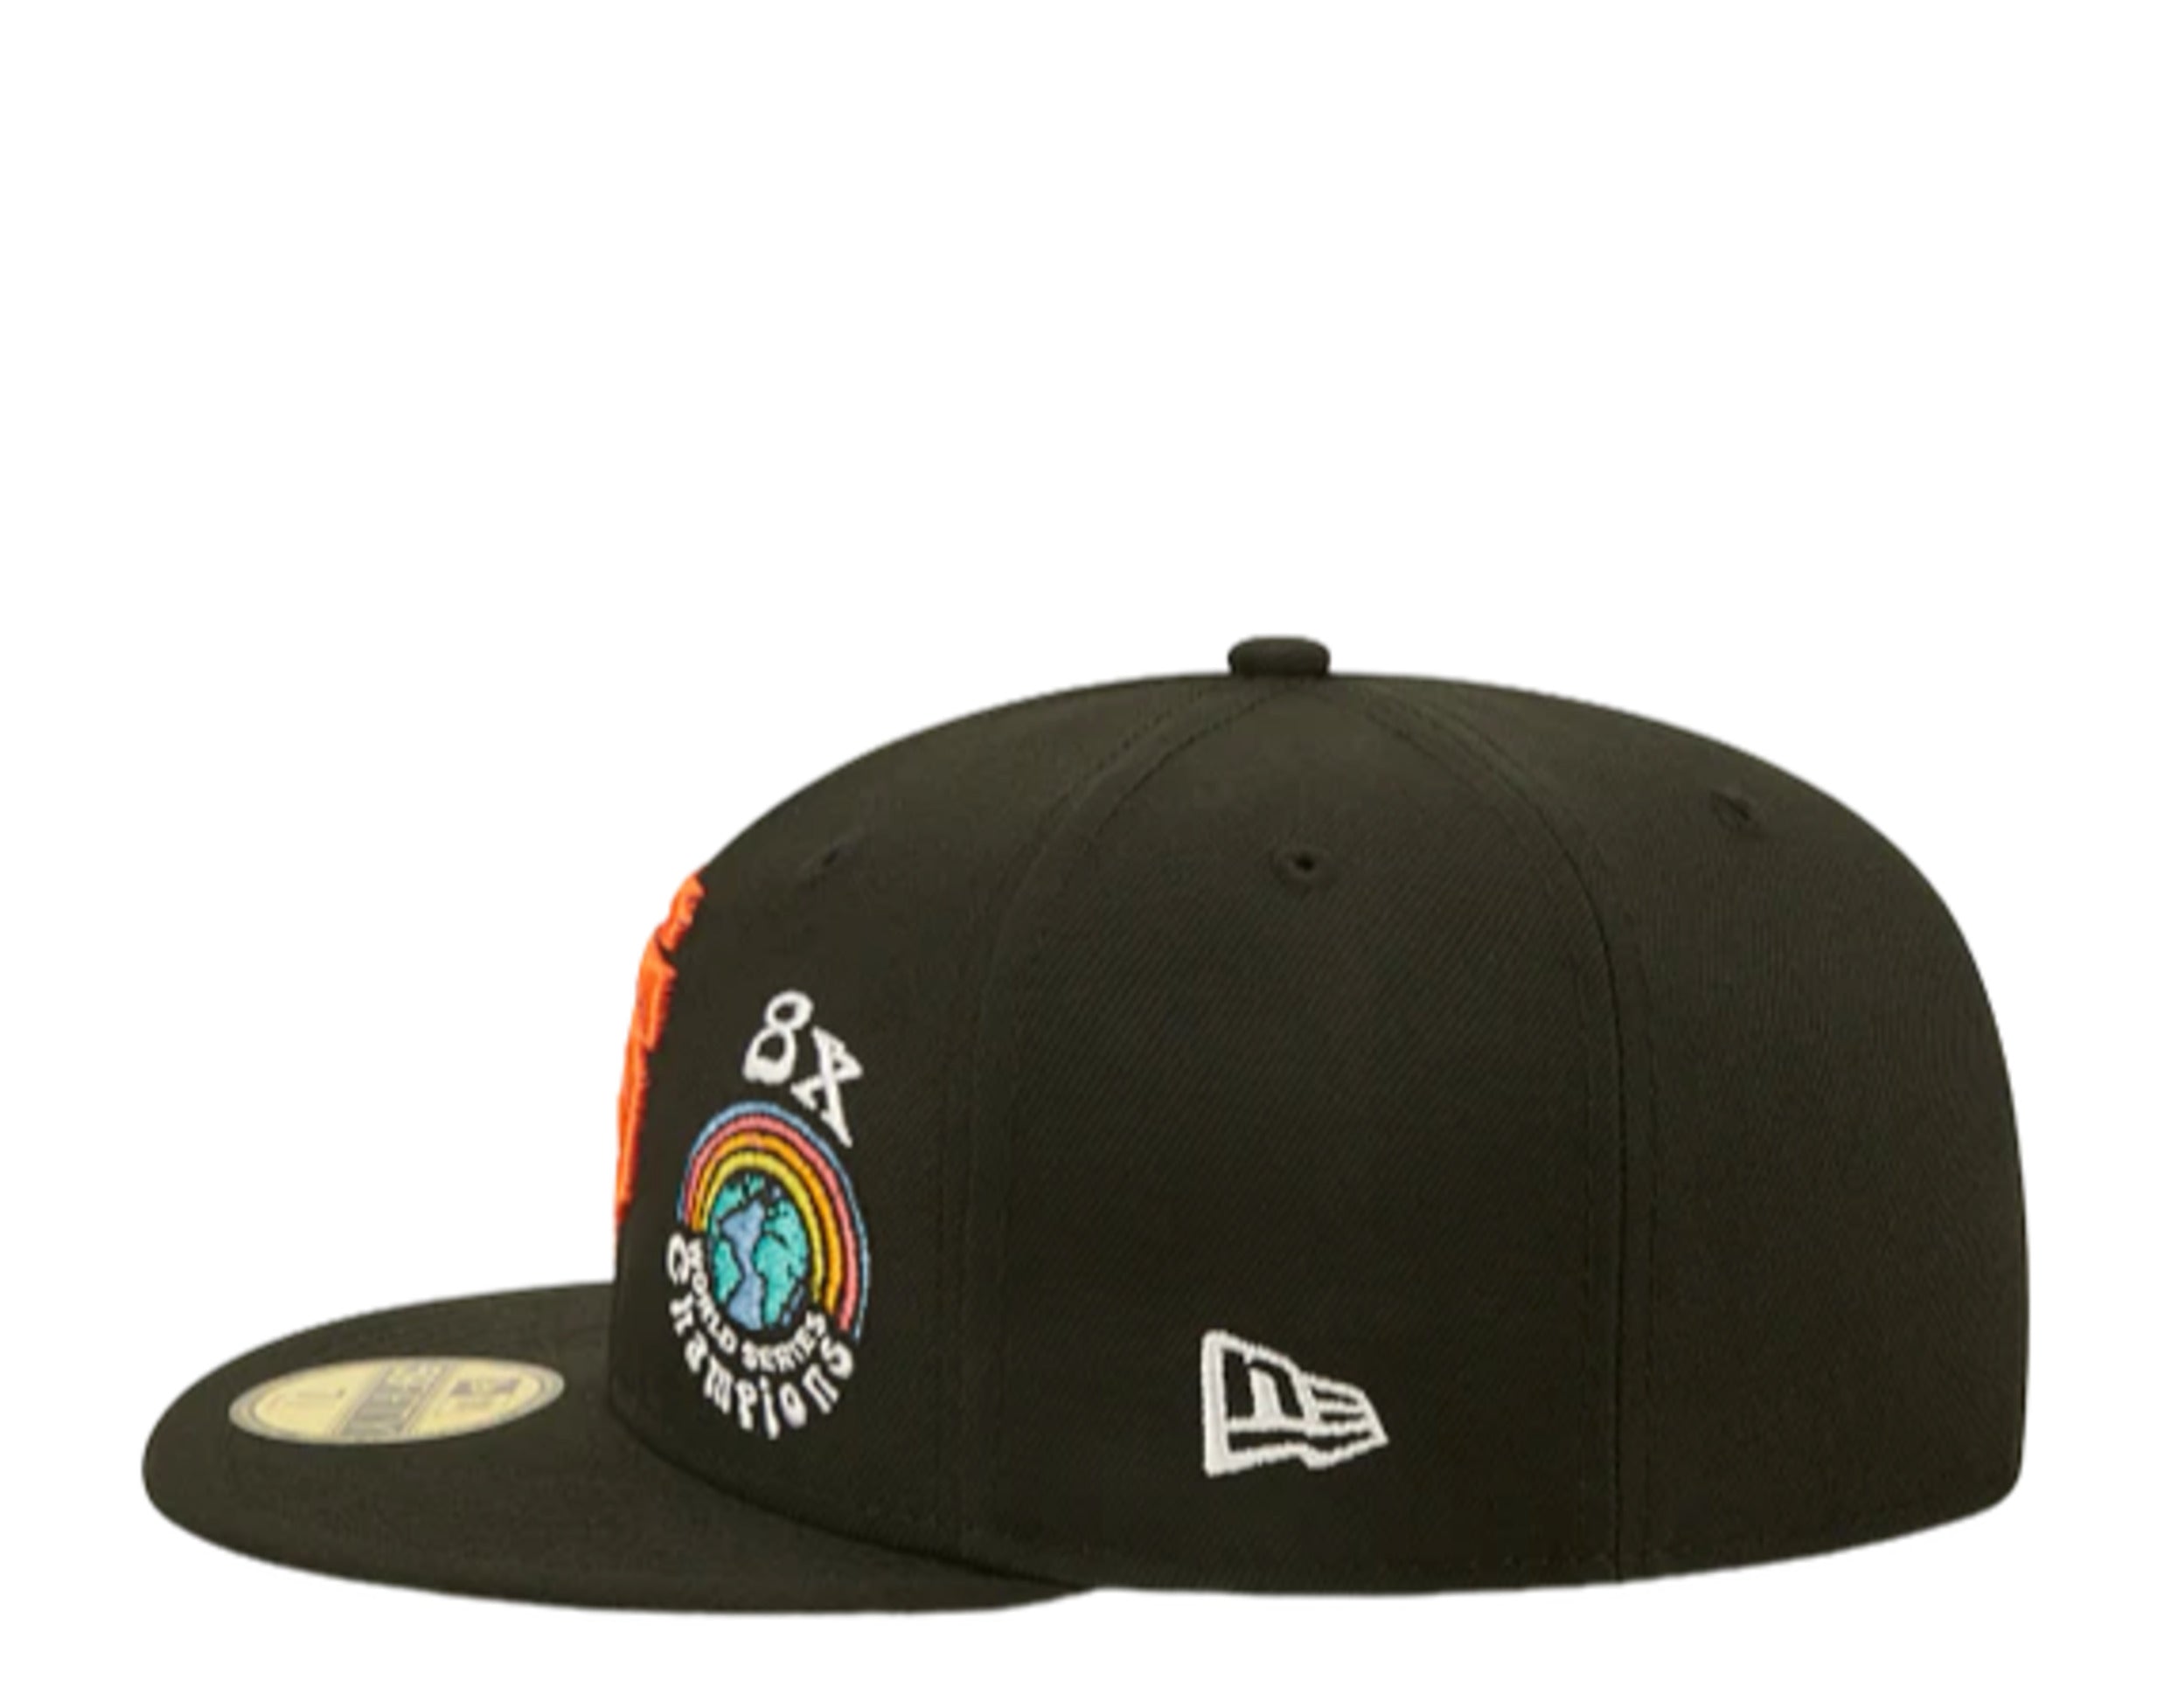 New Era San Francisco Giants Groovy 59FIFTY Fitted Cap: Black/Blue